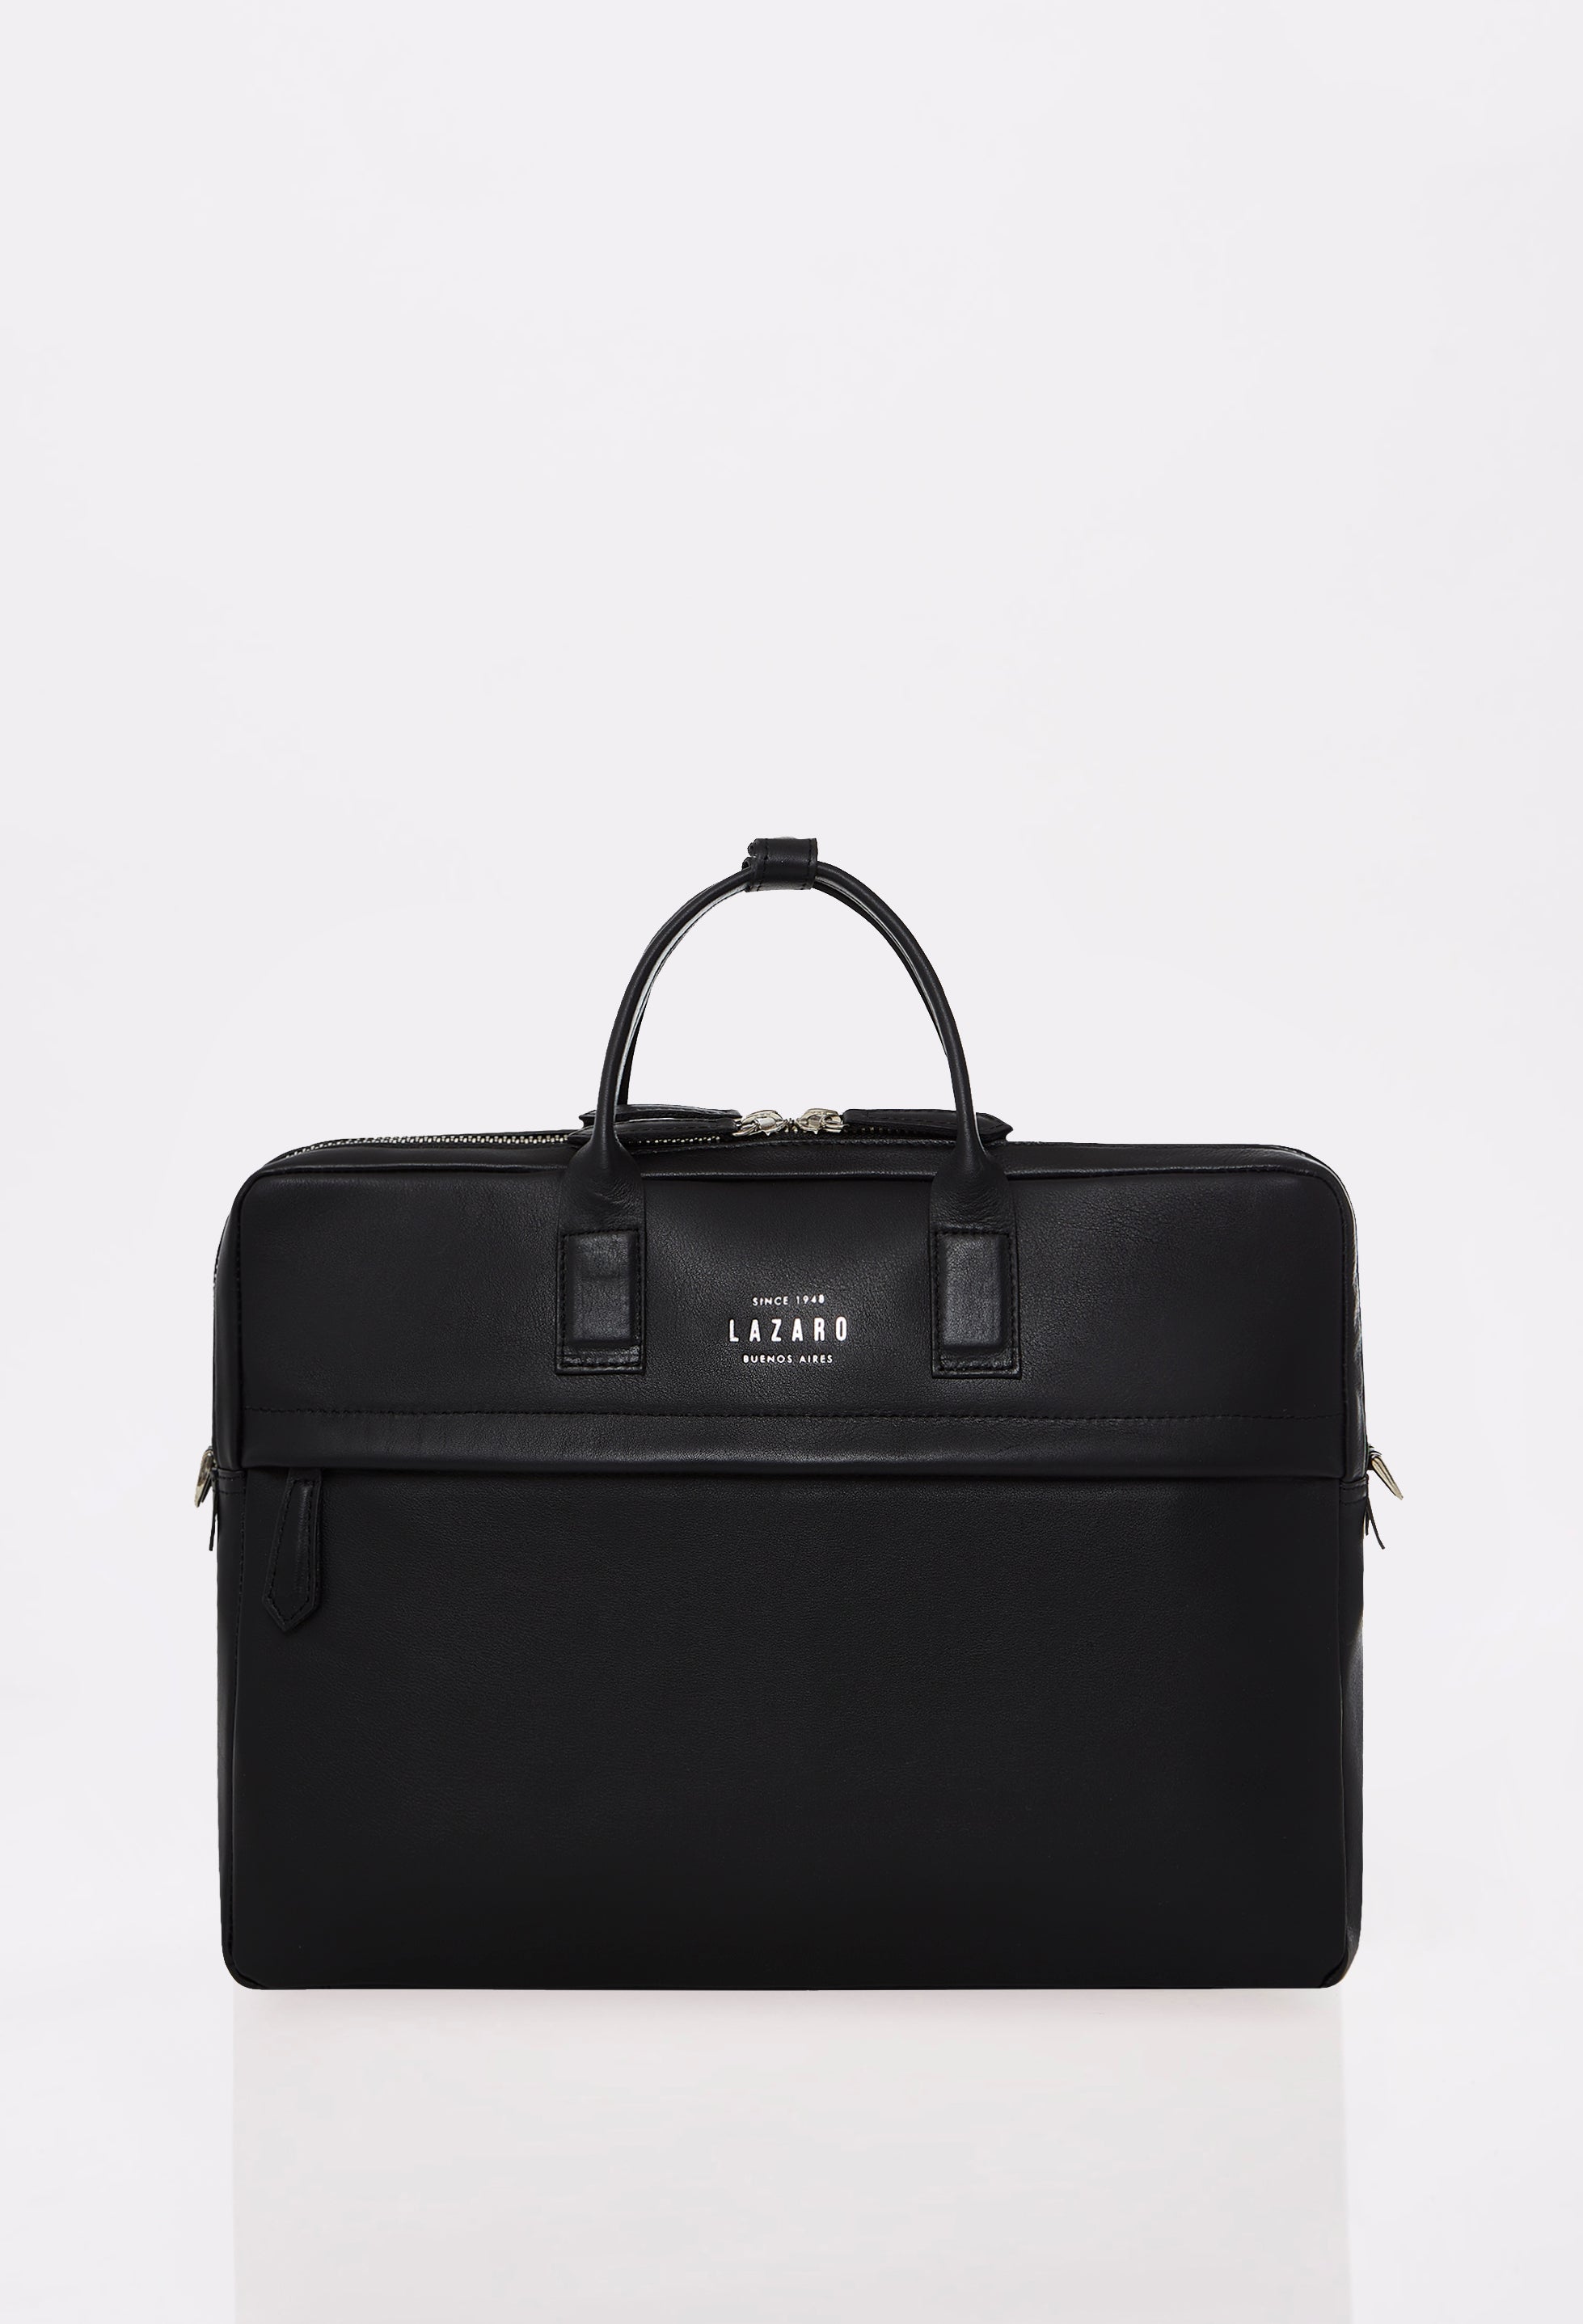 Front of a Black Leather Briefcase with Lazaro logo and a zippered pocket.